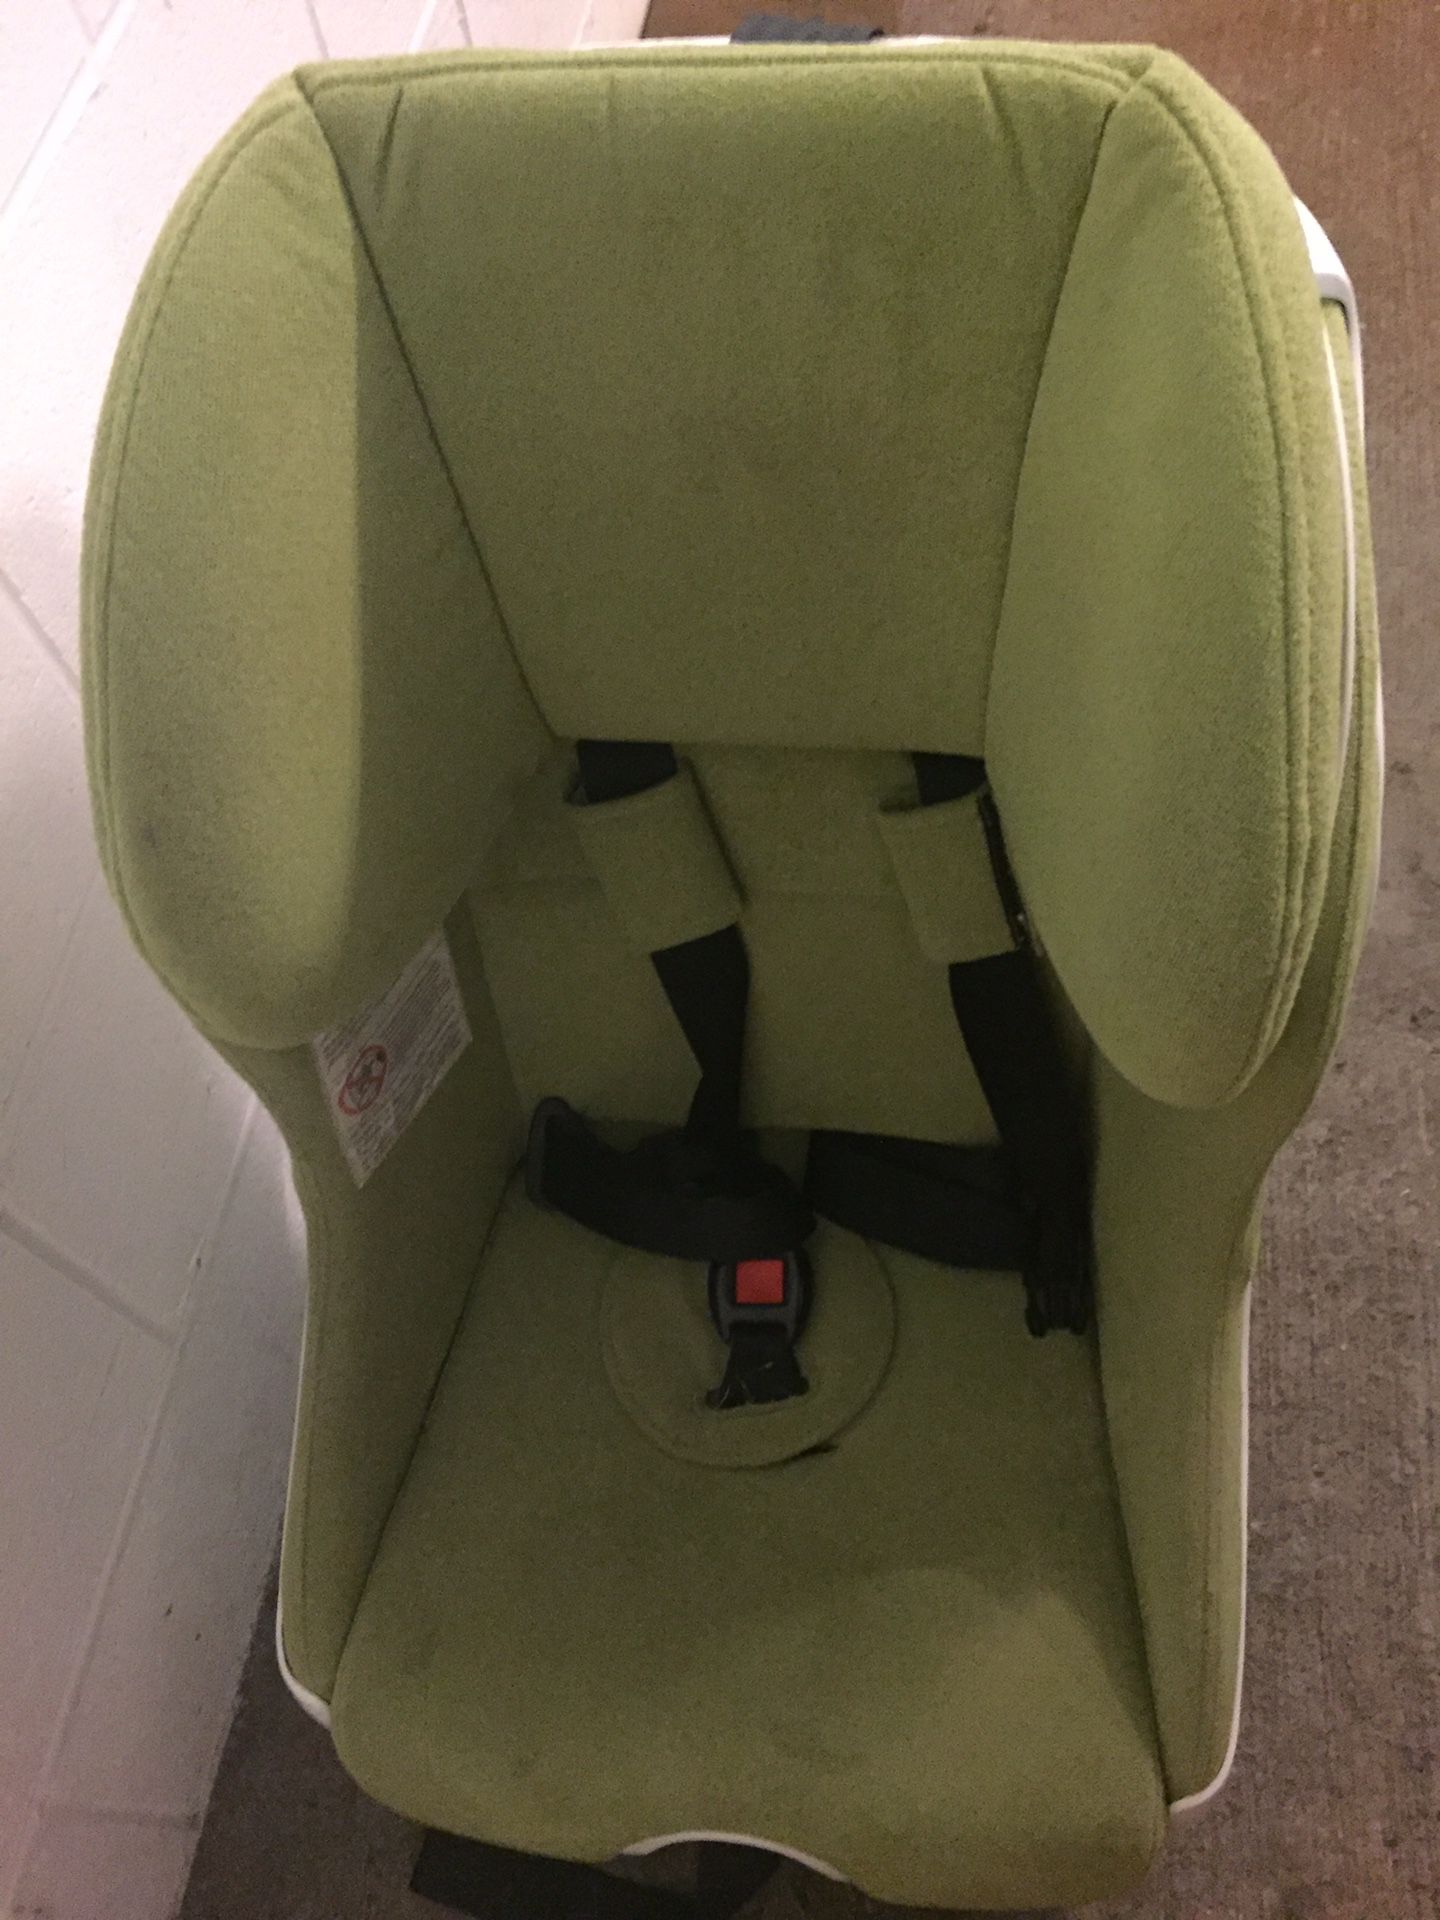 Foonf convertible car seat from Clek